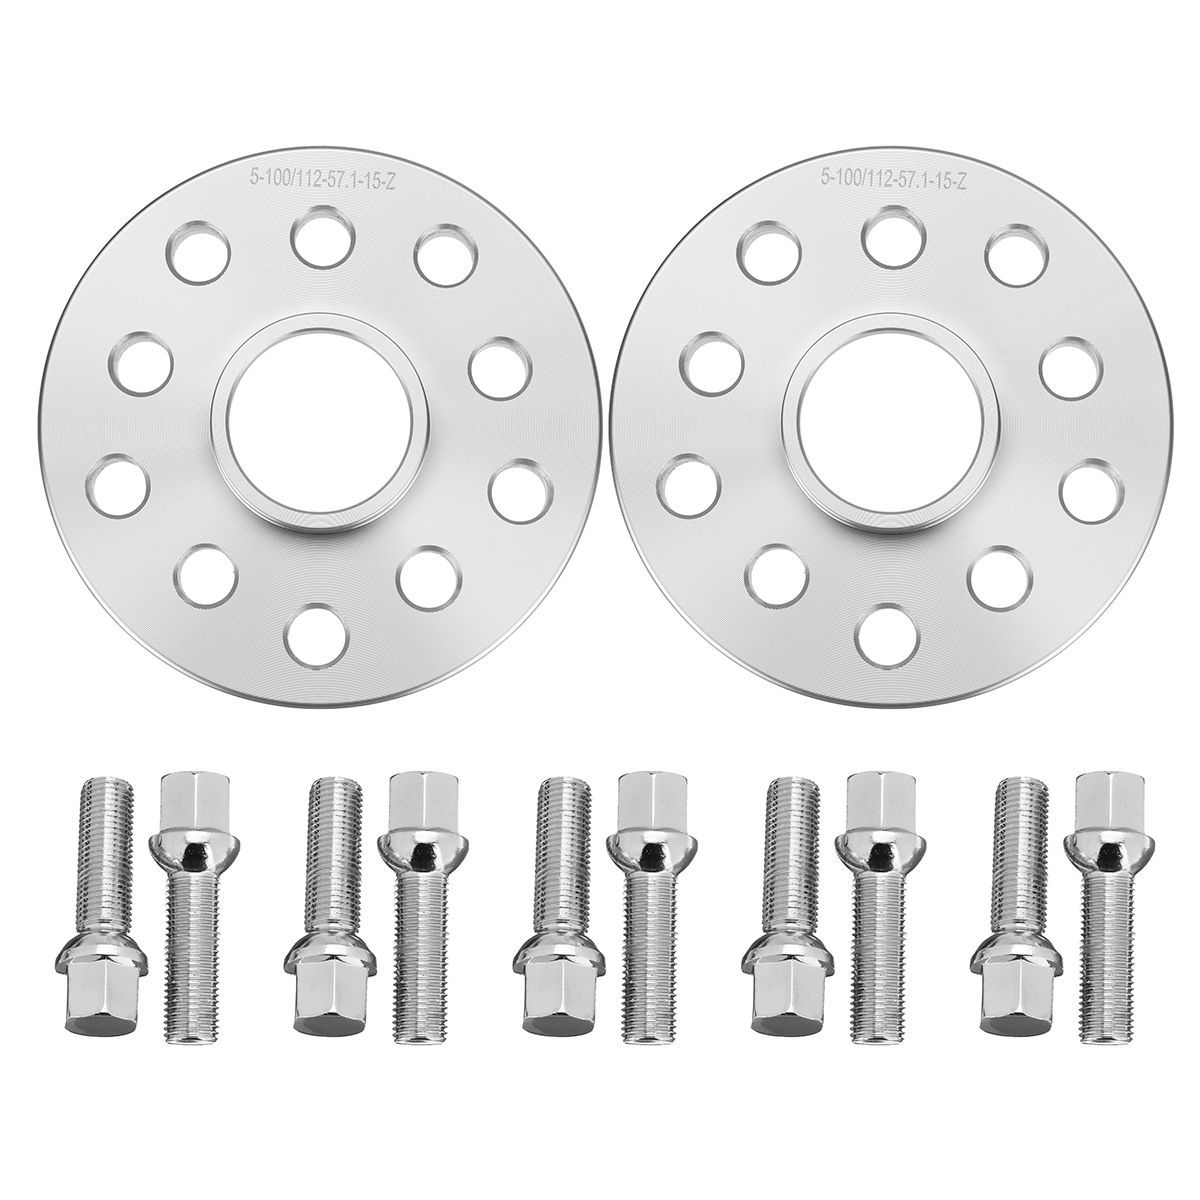 2x-Alloy-Hubcentric-Wheel-Spacer-Shims-5x100112-571-15mm-Bolt-For-VW-Volkswagen-1512406